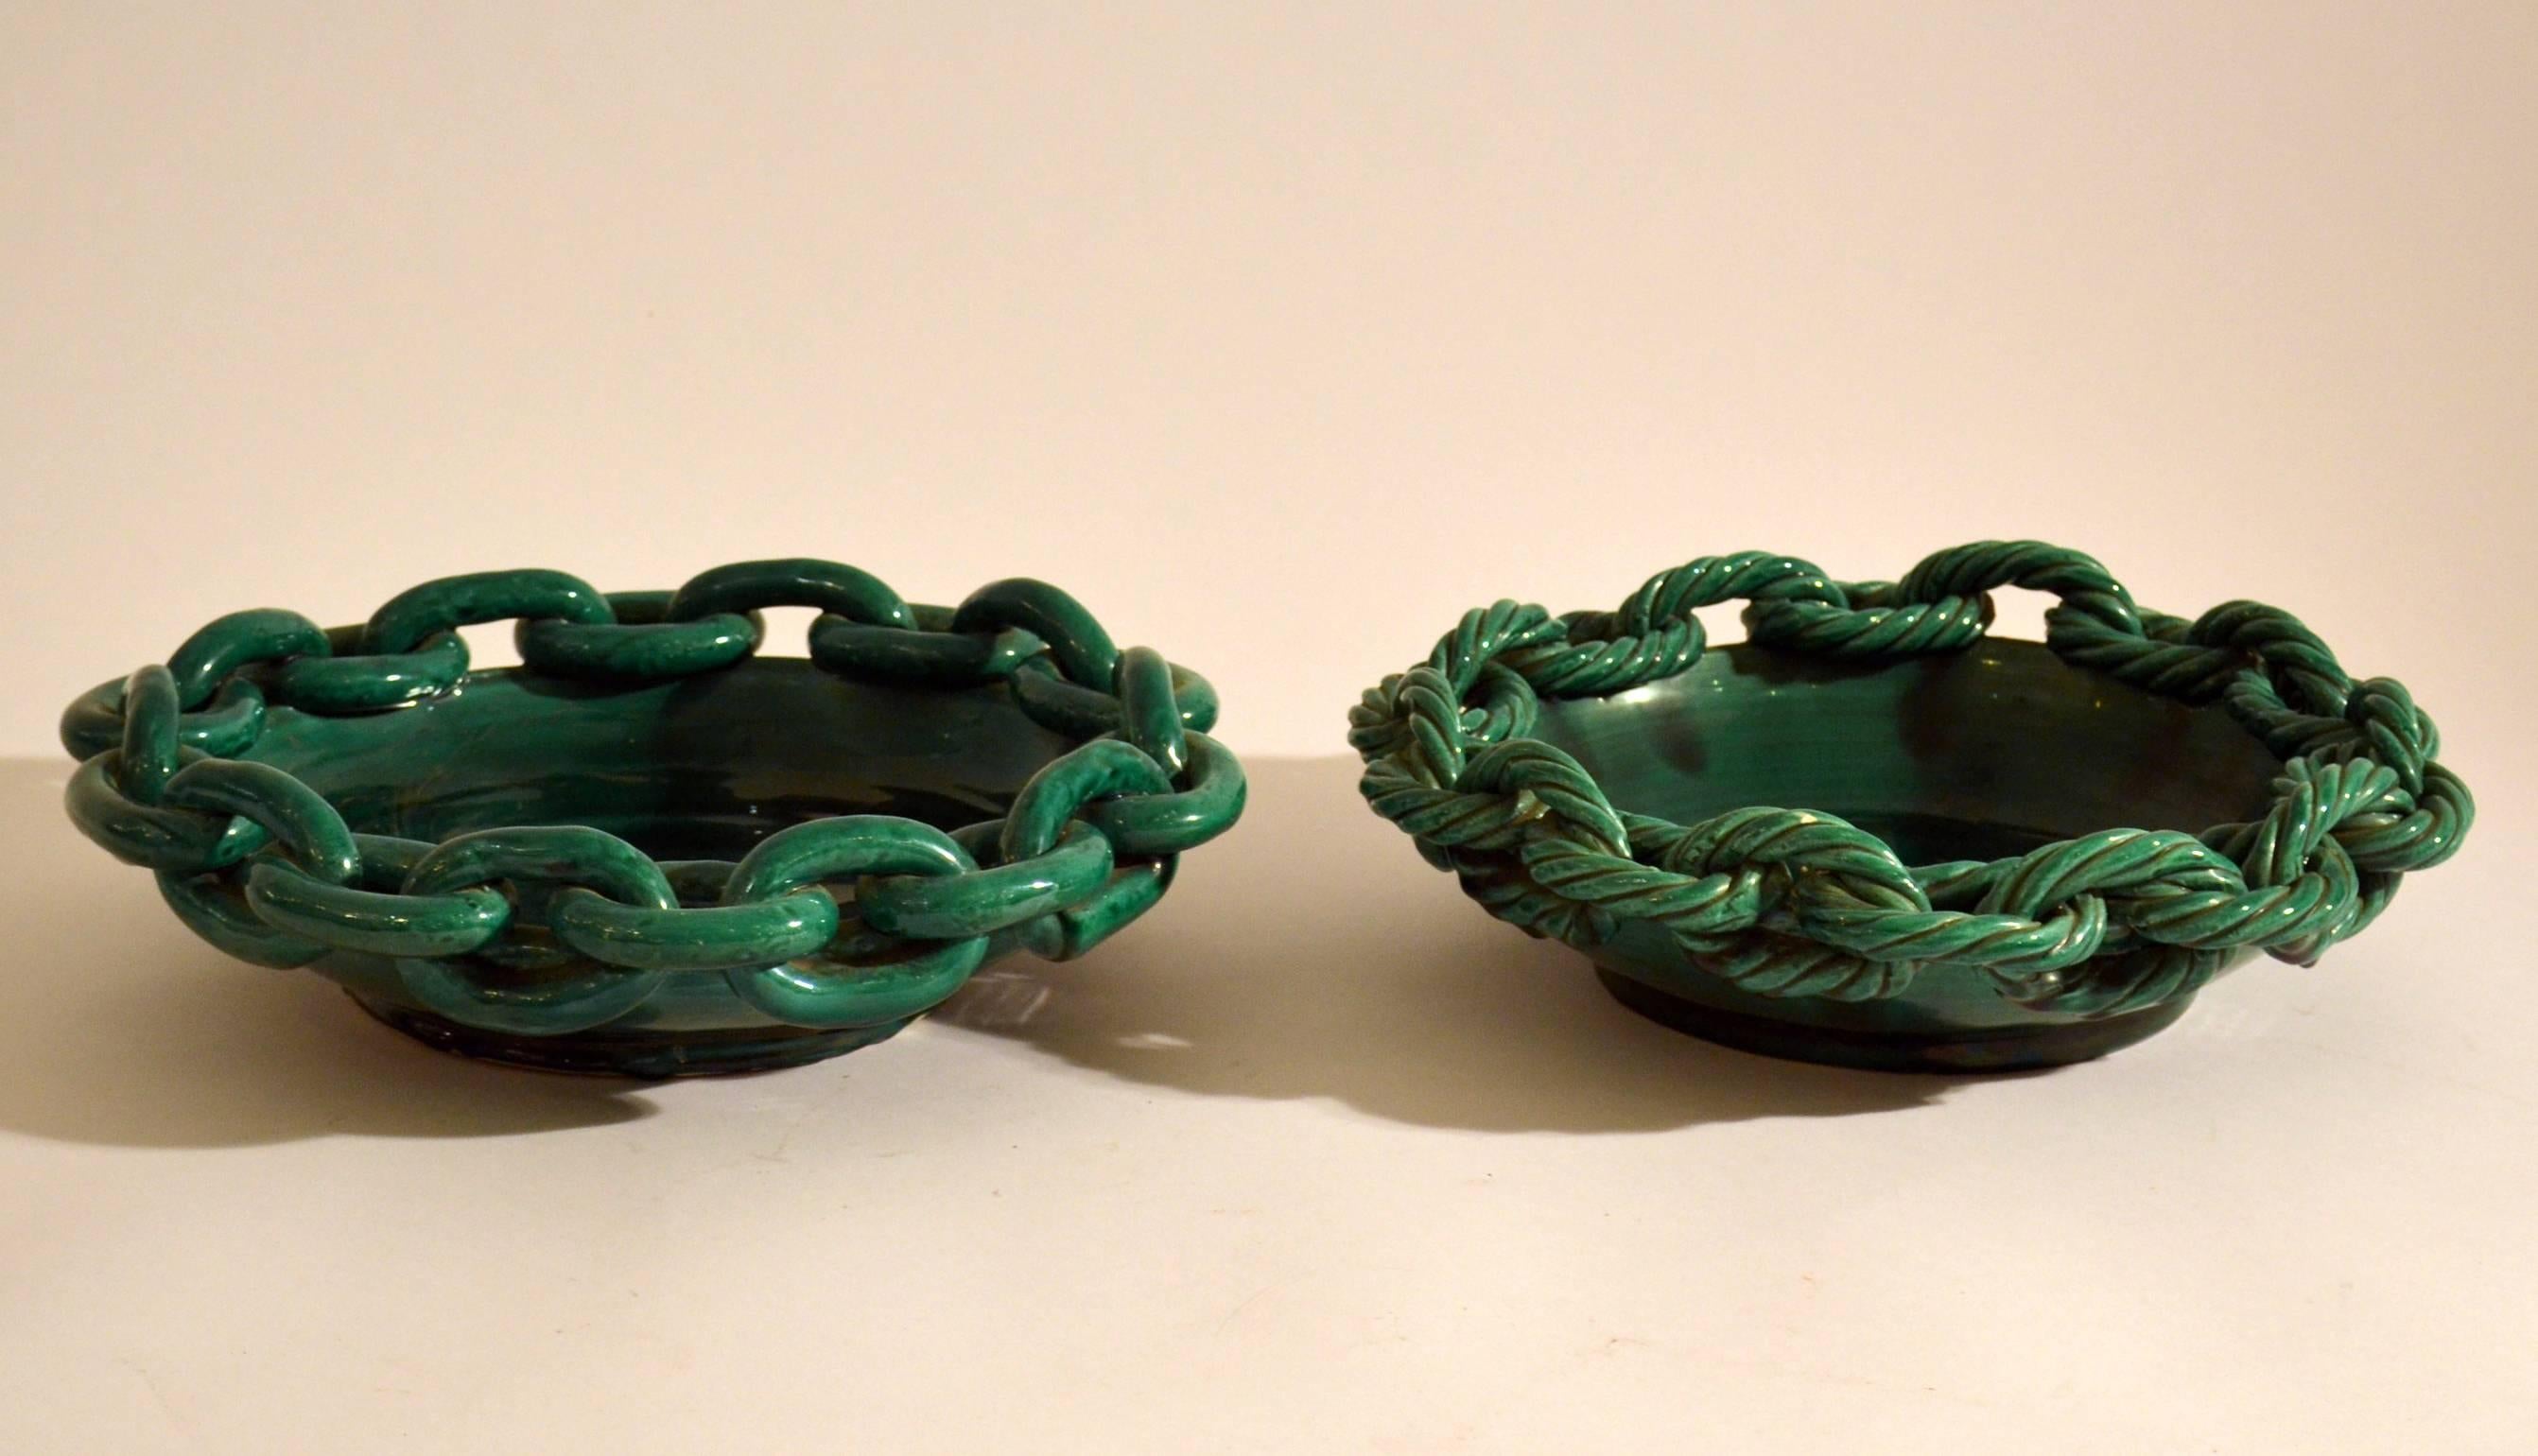 1950s Bowl in Emerald Green Ceramic with Chained Rope Edge by Vallauris, France 1